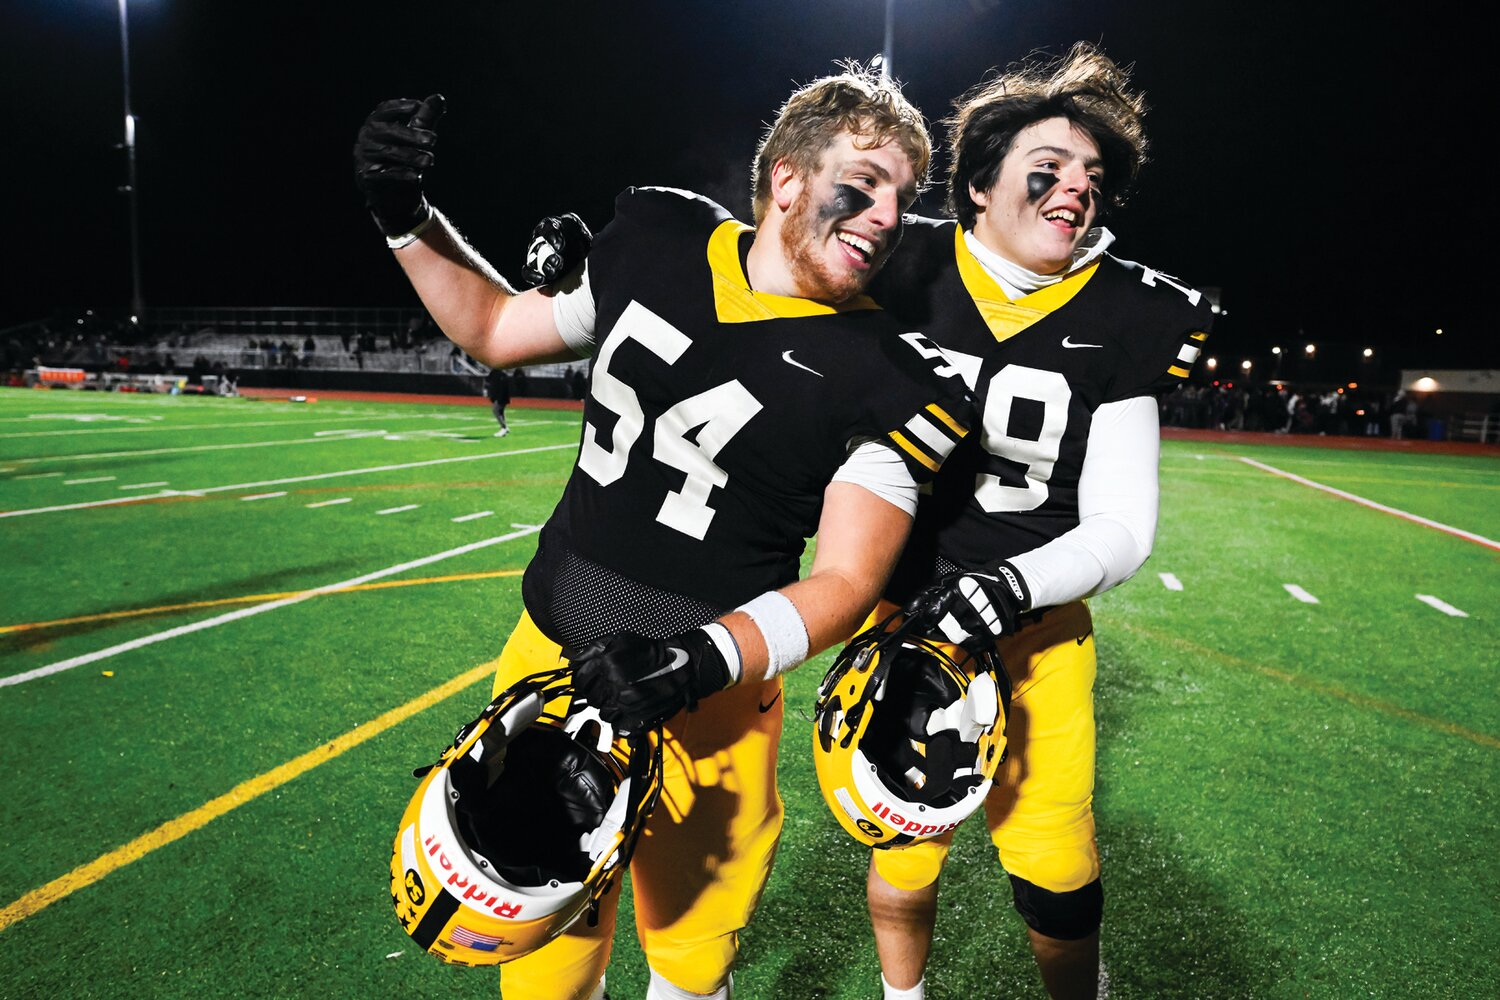 Central Bucks West’s Hayden Mulligan and Chago Bustelo run off the field after the overtime victory.